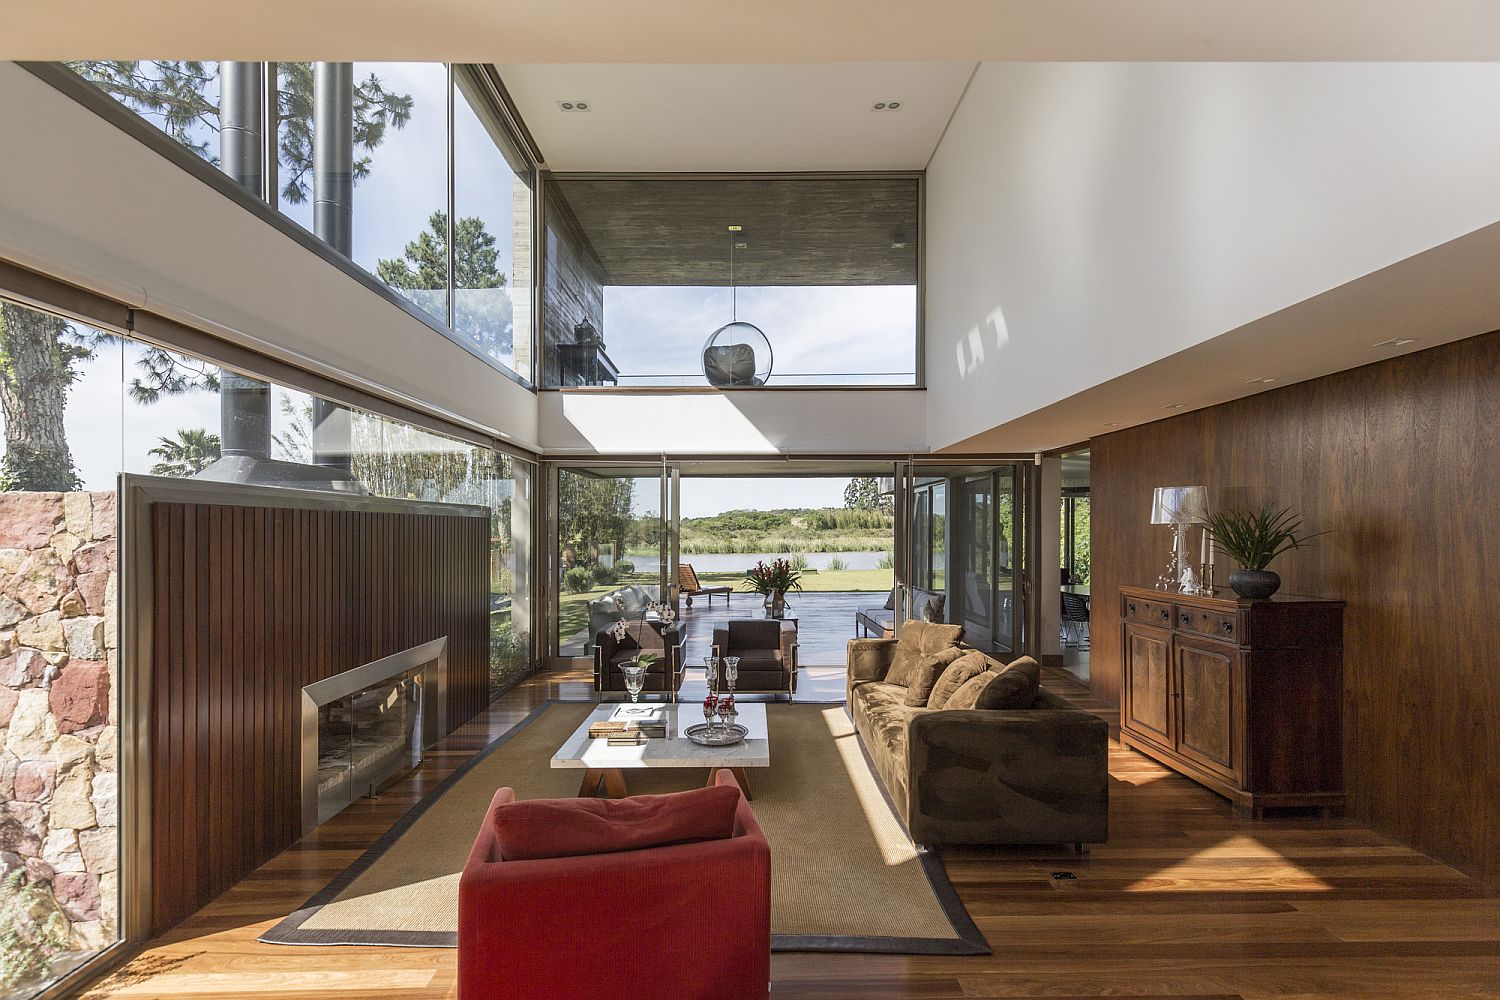 Double height living room of the spacious Brazilian home with river views